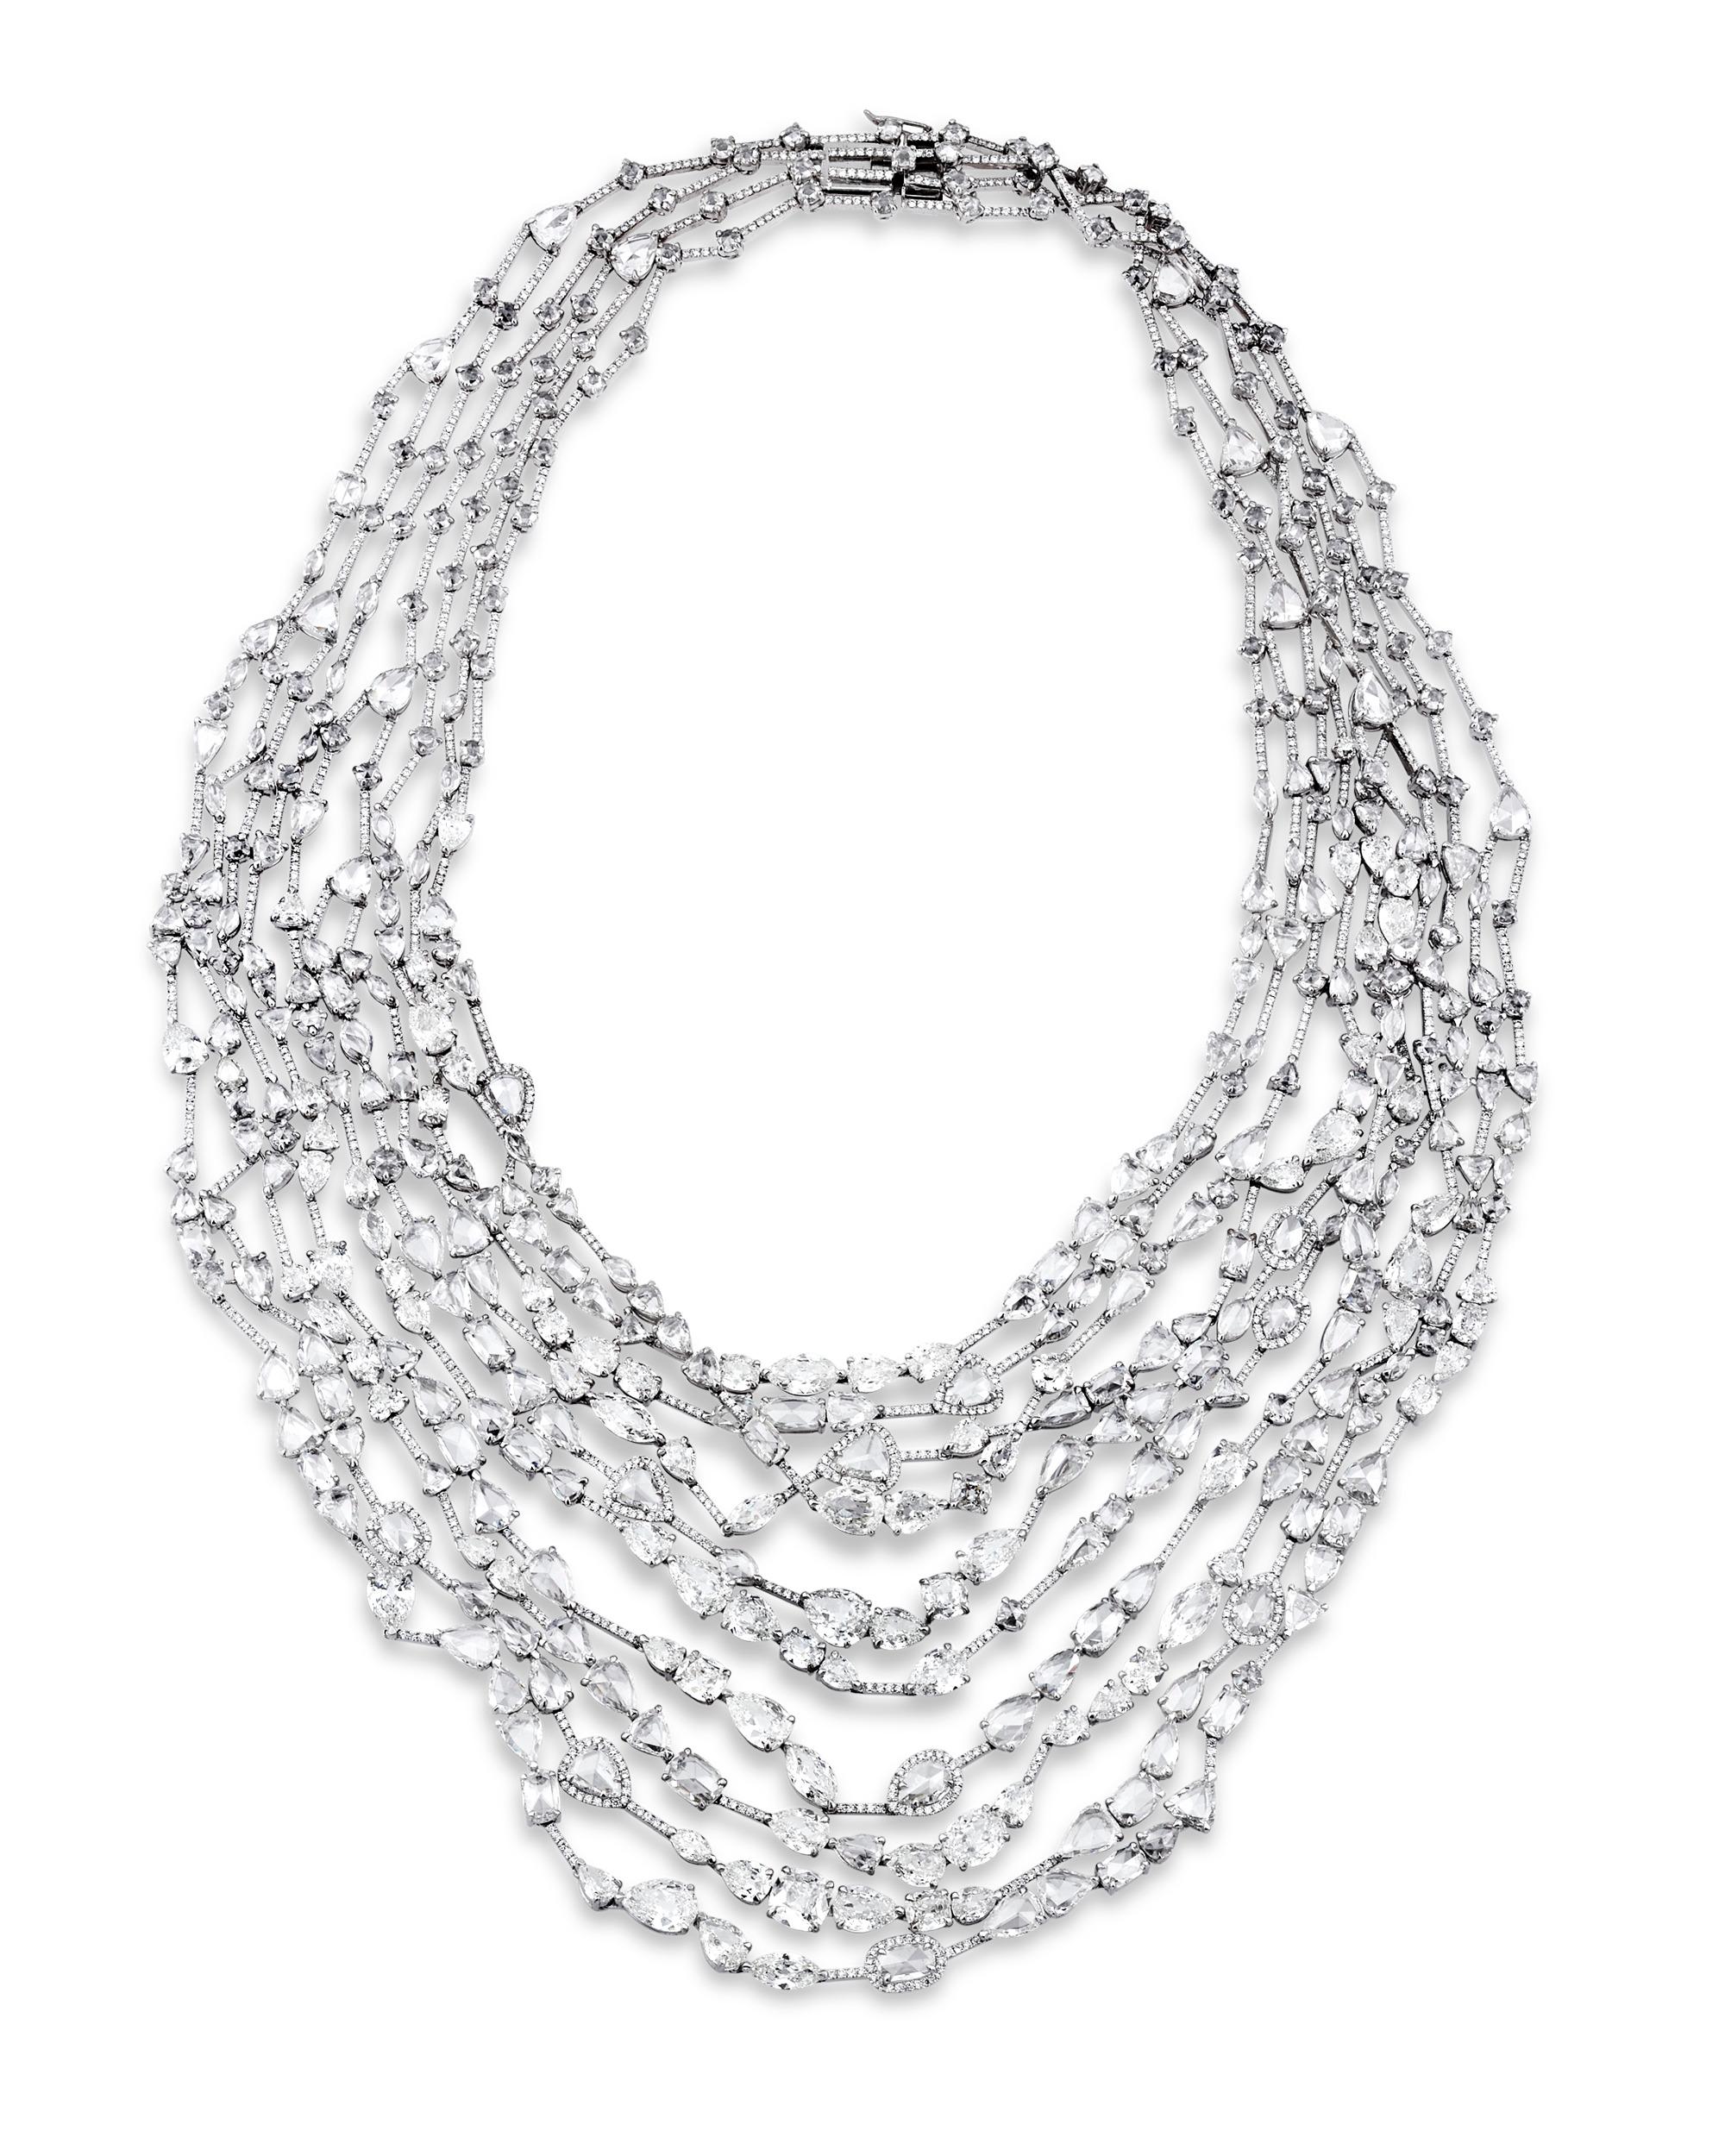 An array of rose-cut and faceted diamonds are set in this spectacular multi-strand necklace. The jewels weigh a combined 83.03 total carats and are cut in oval, pear, round and other dazzling shapes meticulously set in 18K white gold. 

The rose cut